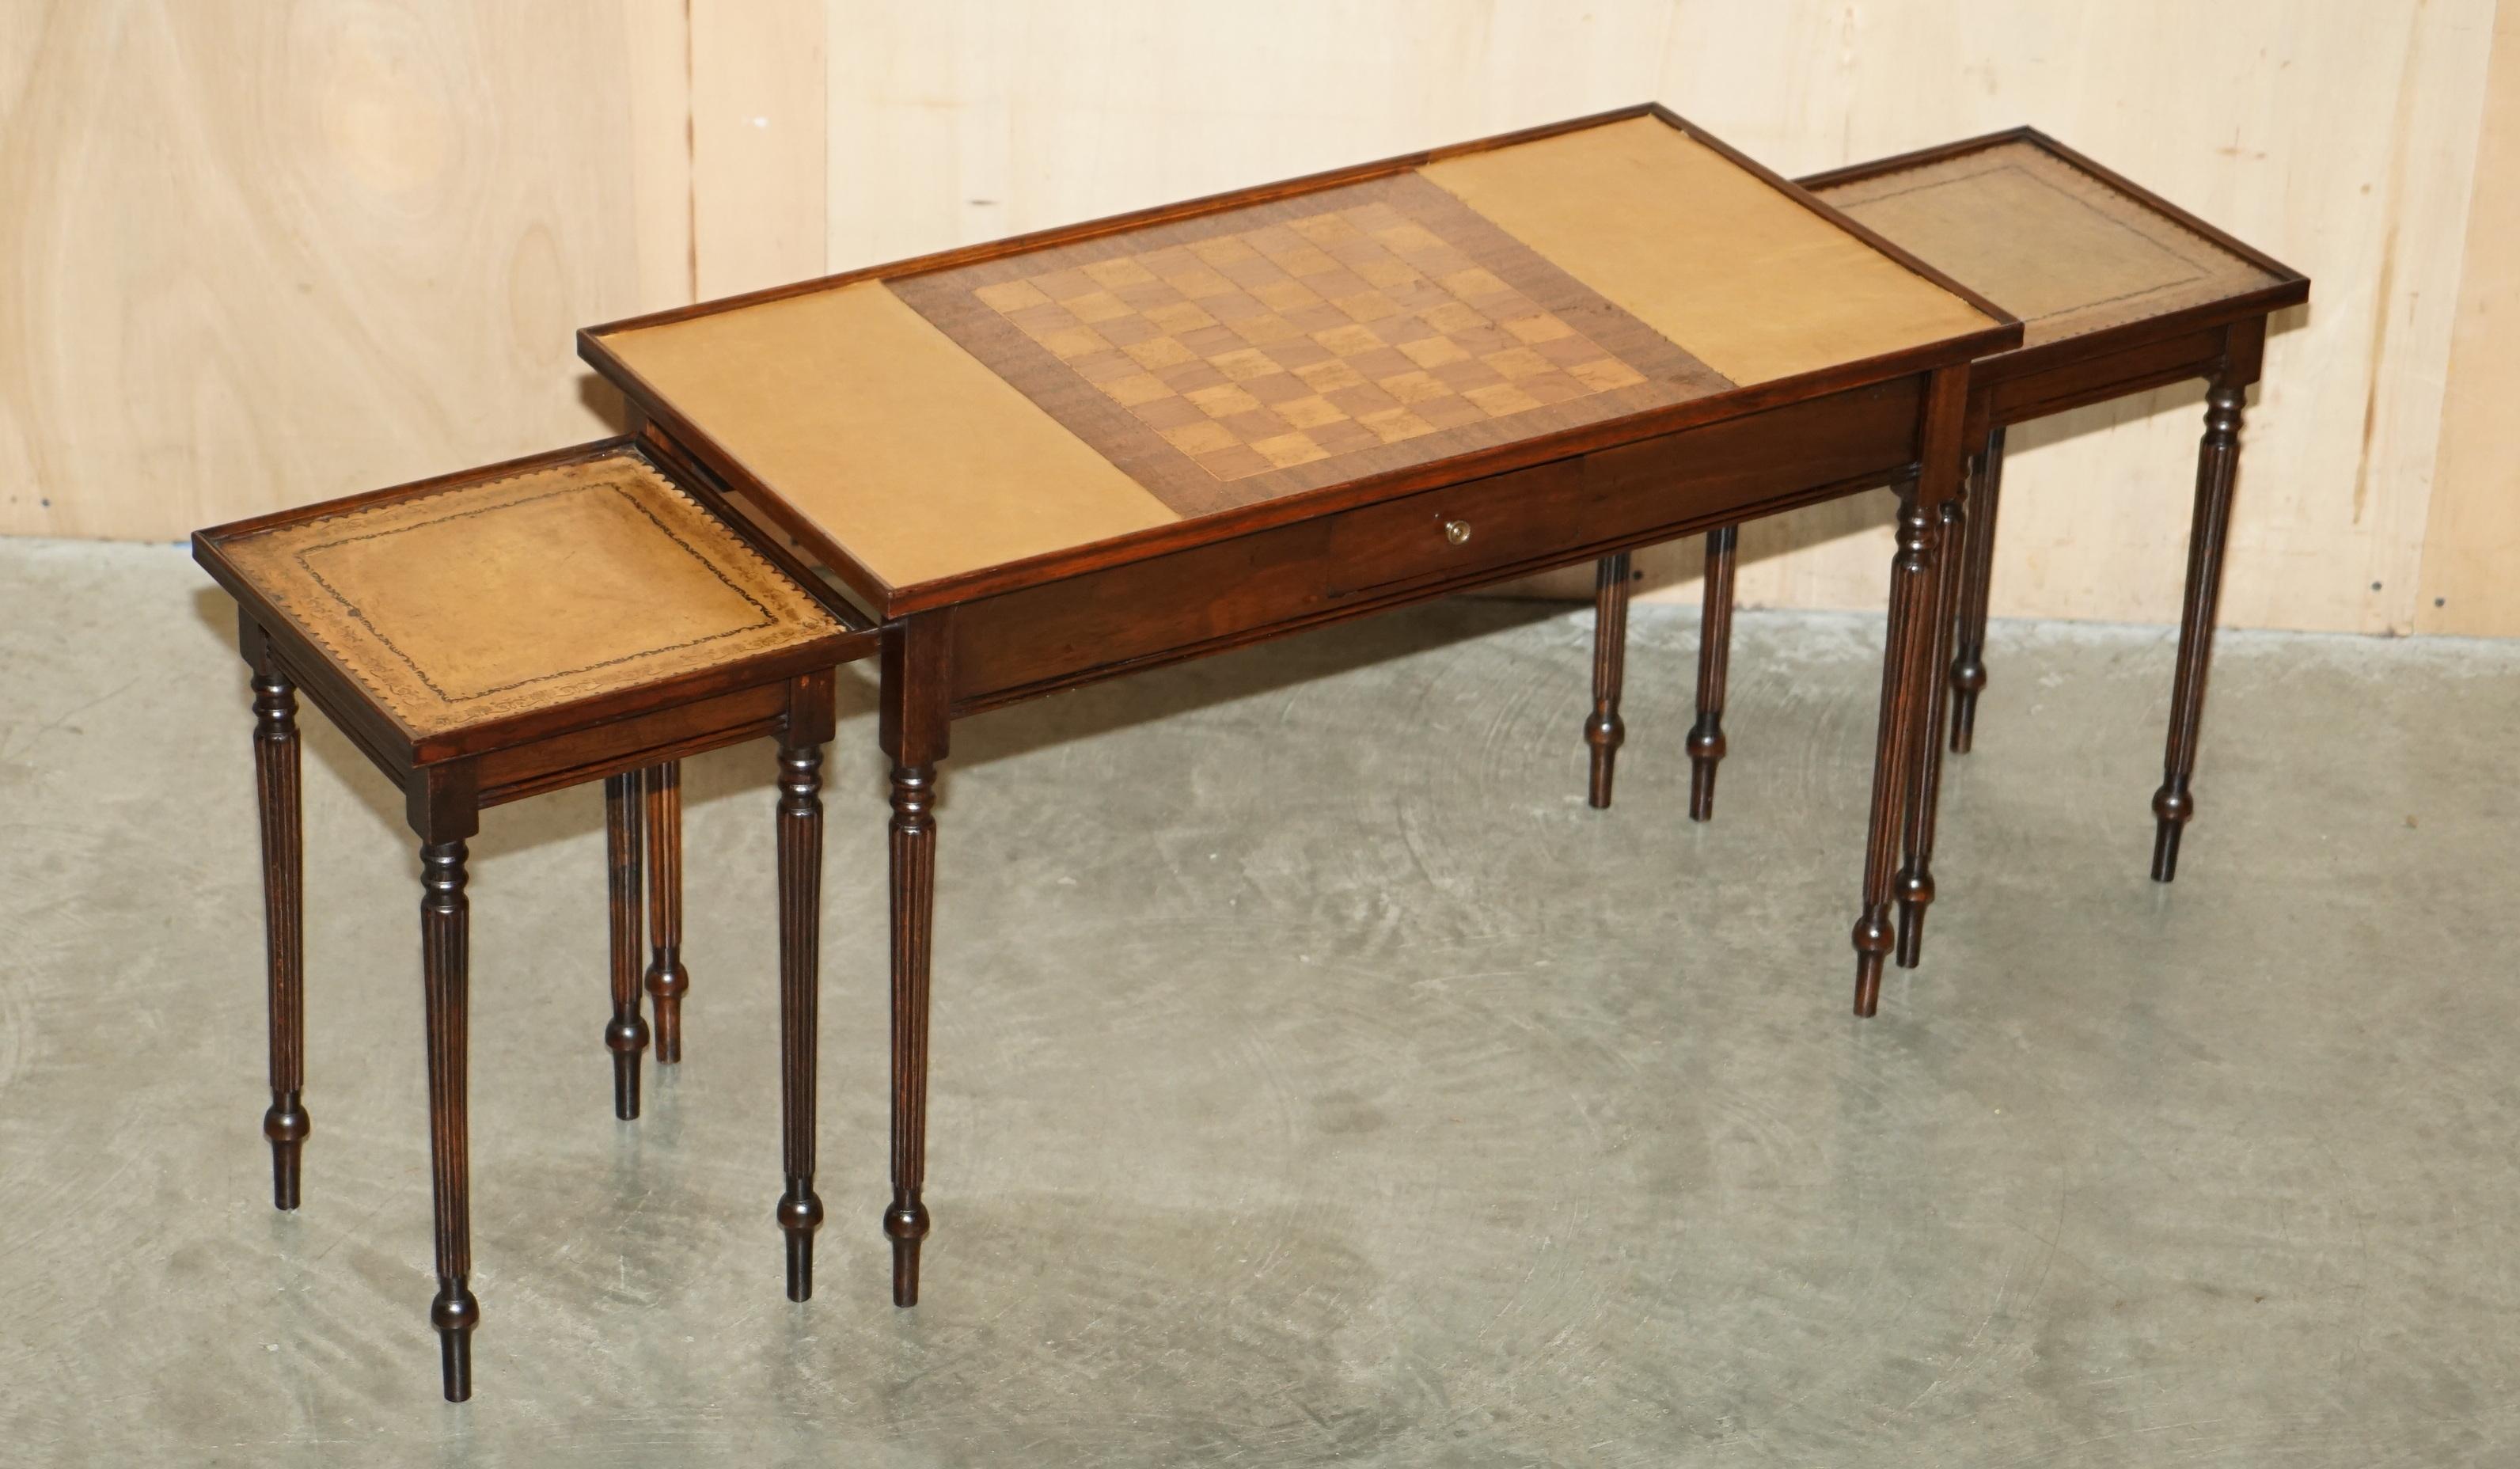 Royal House Antiques

Royal House Antiques is delighted to offer for sale this absolutely stunning, vintage circa 1950's brown leather Chessboard top coffee table with two nesting tables under

Please note the delivery fee listed is just a guide, it